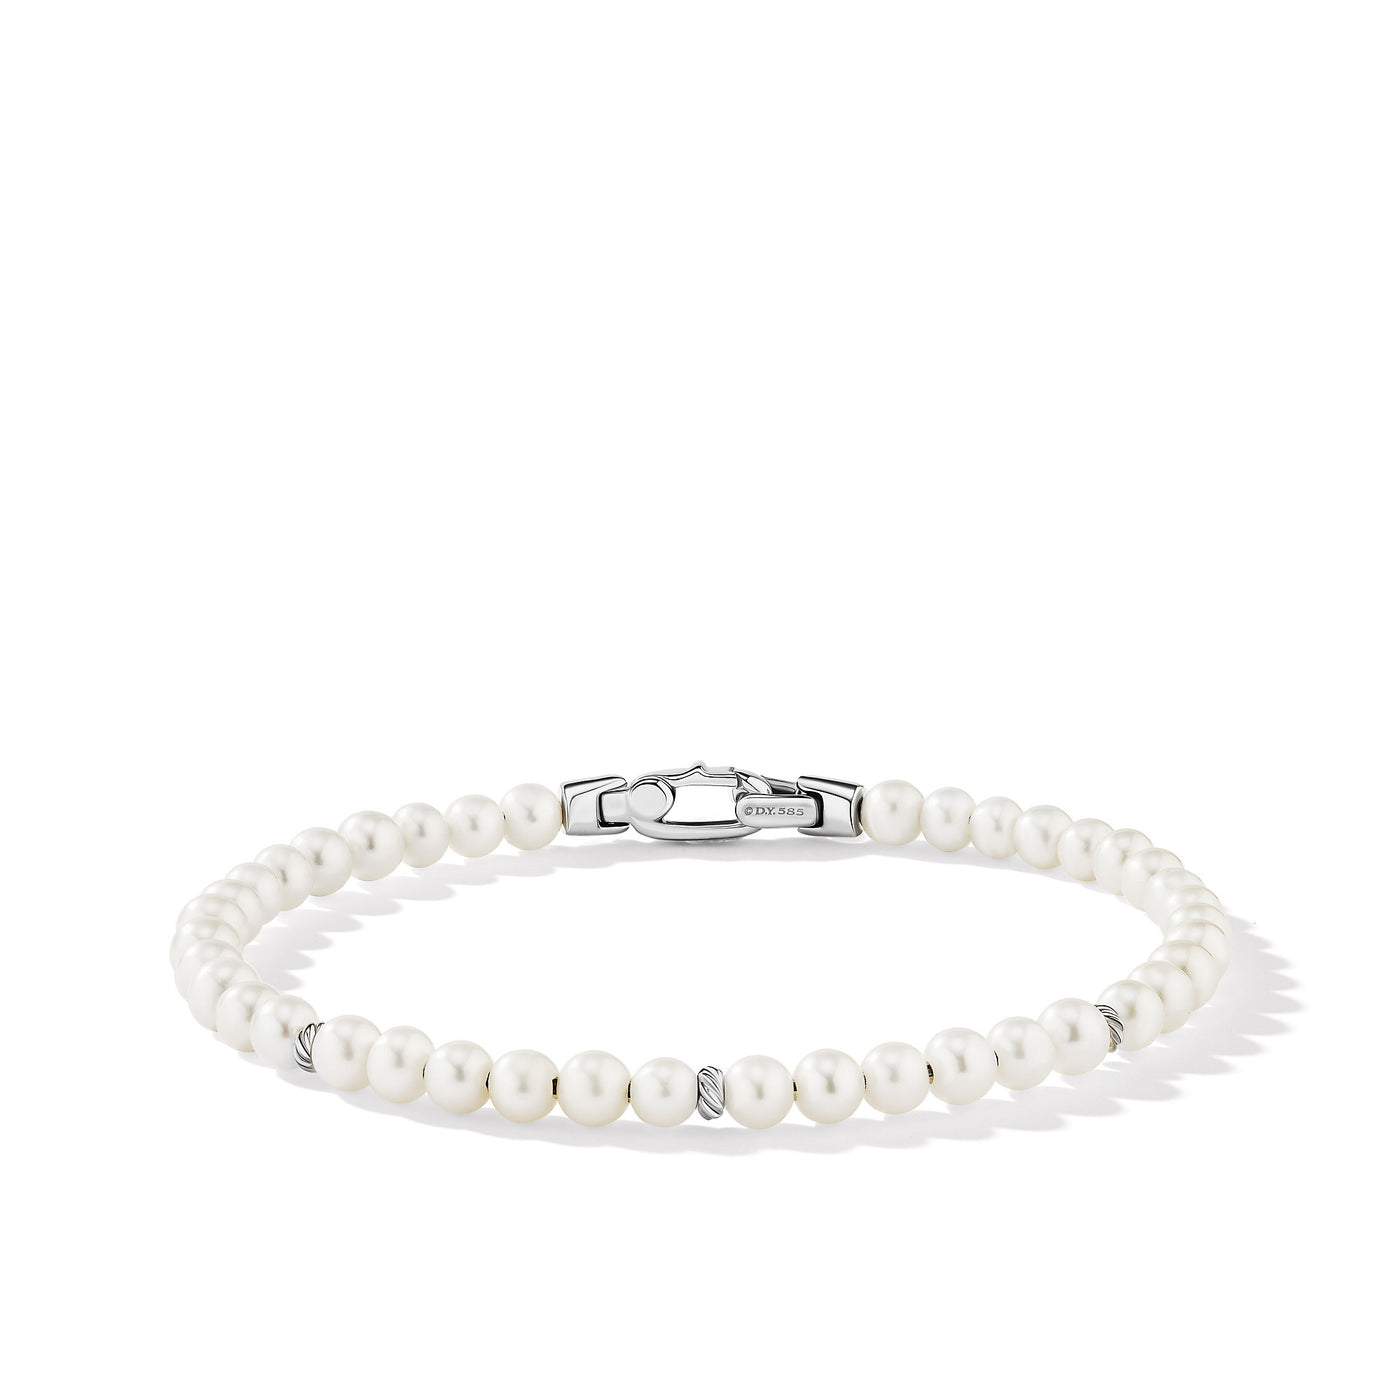 Bijoux Spiritual Beads Bracelet with Pearls and Sterling Silver\, 4mm